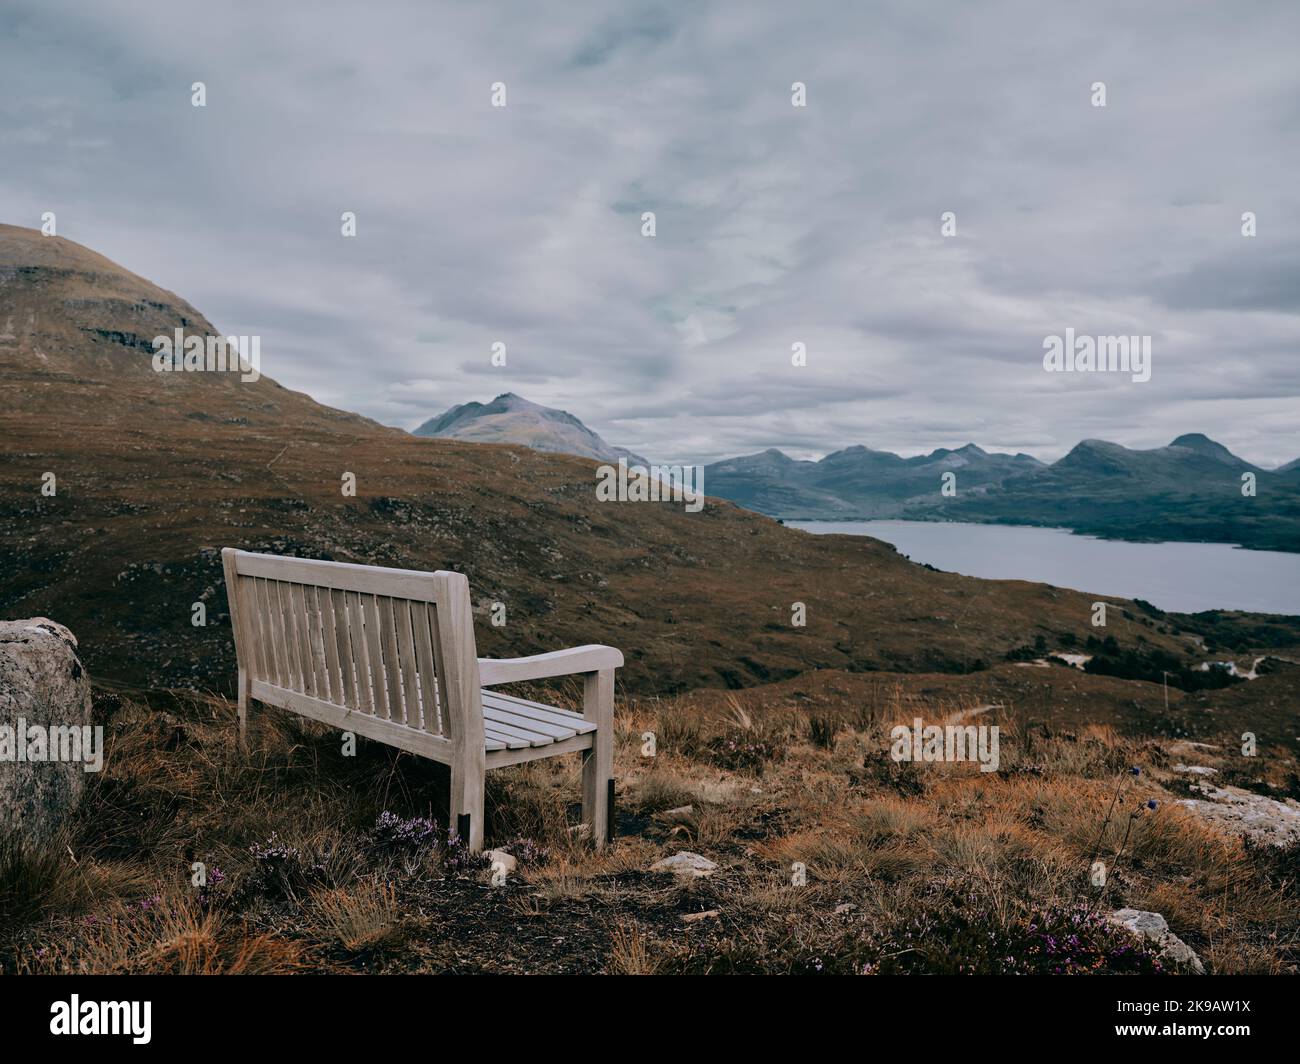 A public bench seat in the remote scottish mountain landscape of Upper Loch Torridon, Wester Ross, Scotland UK Stock Photo